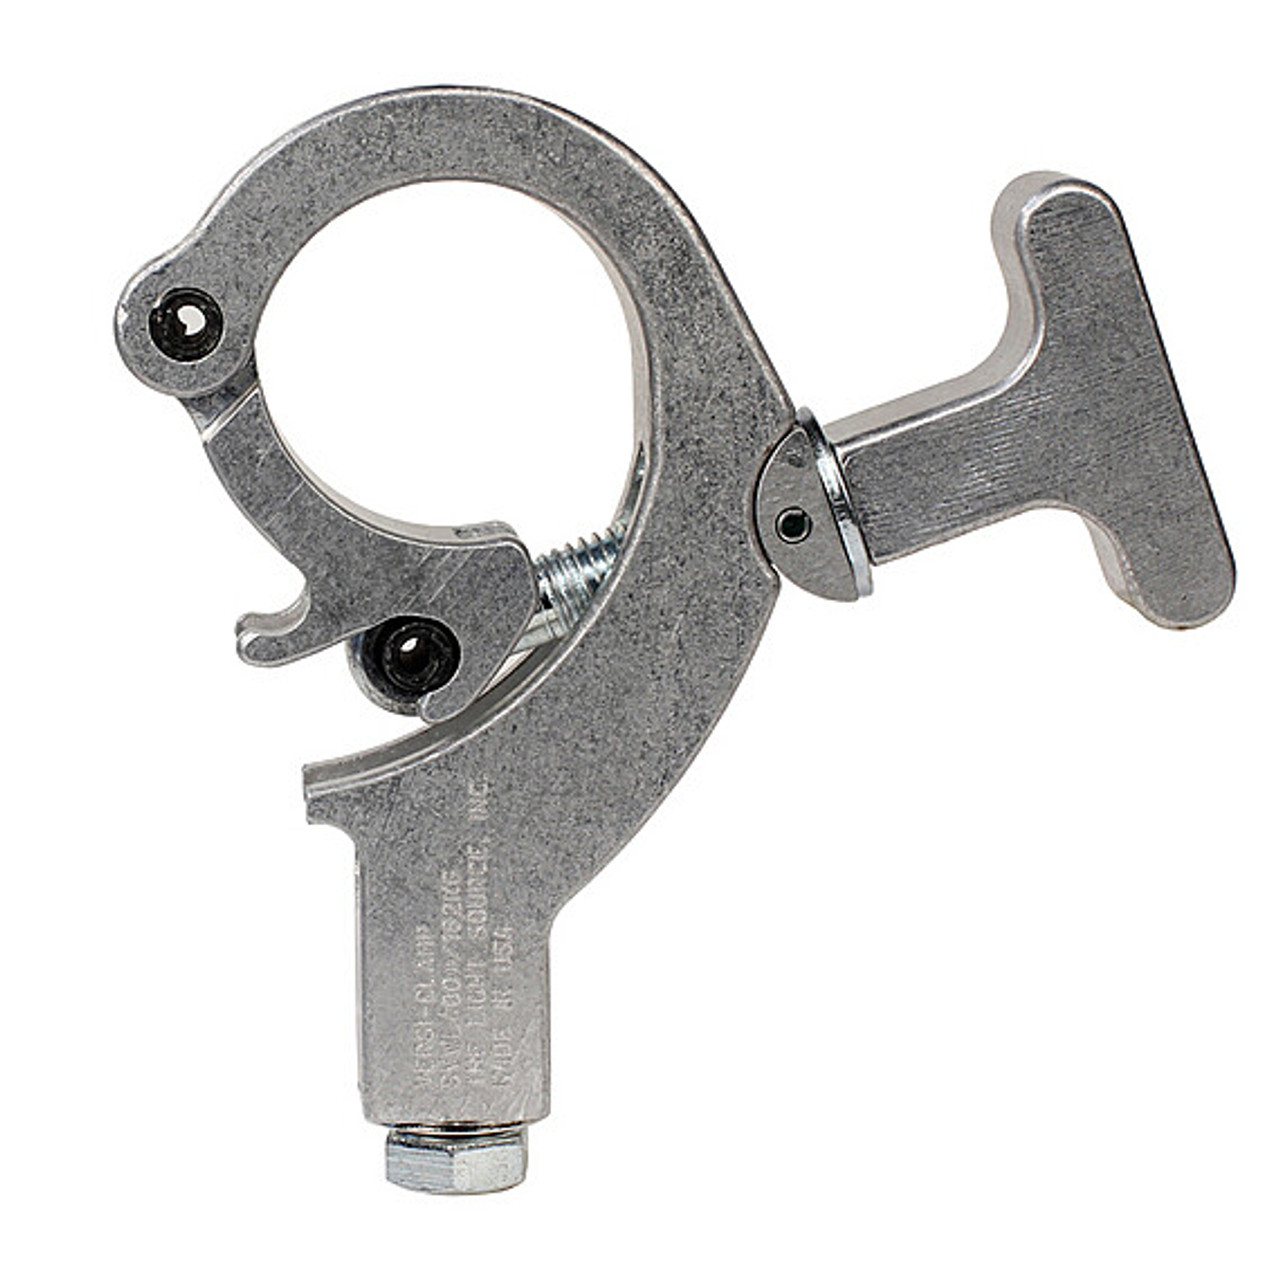 The Light Source VCM Versi-Clamp Silver Finish